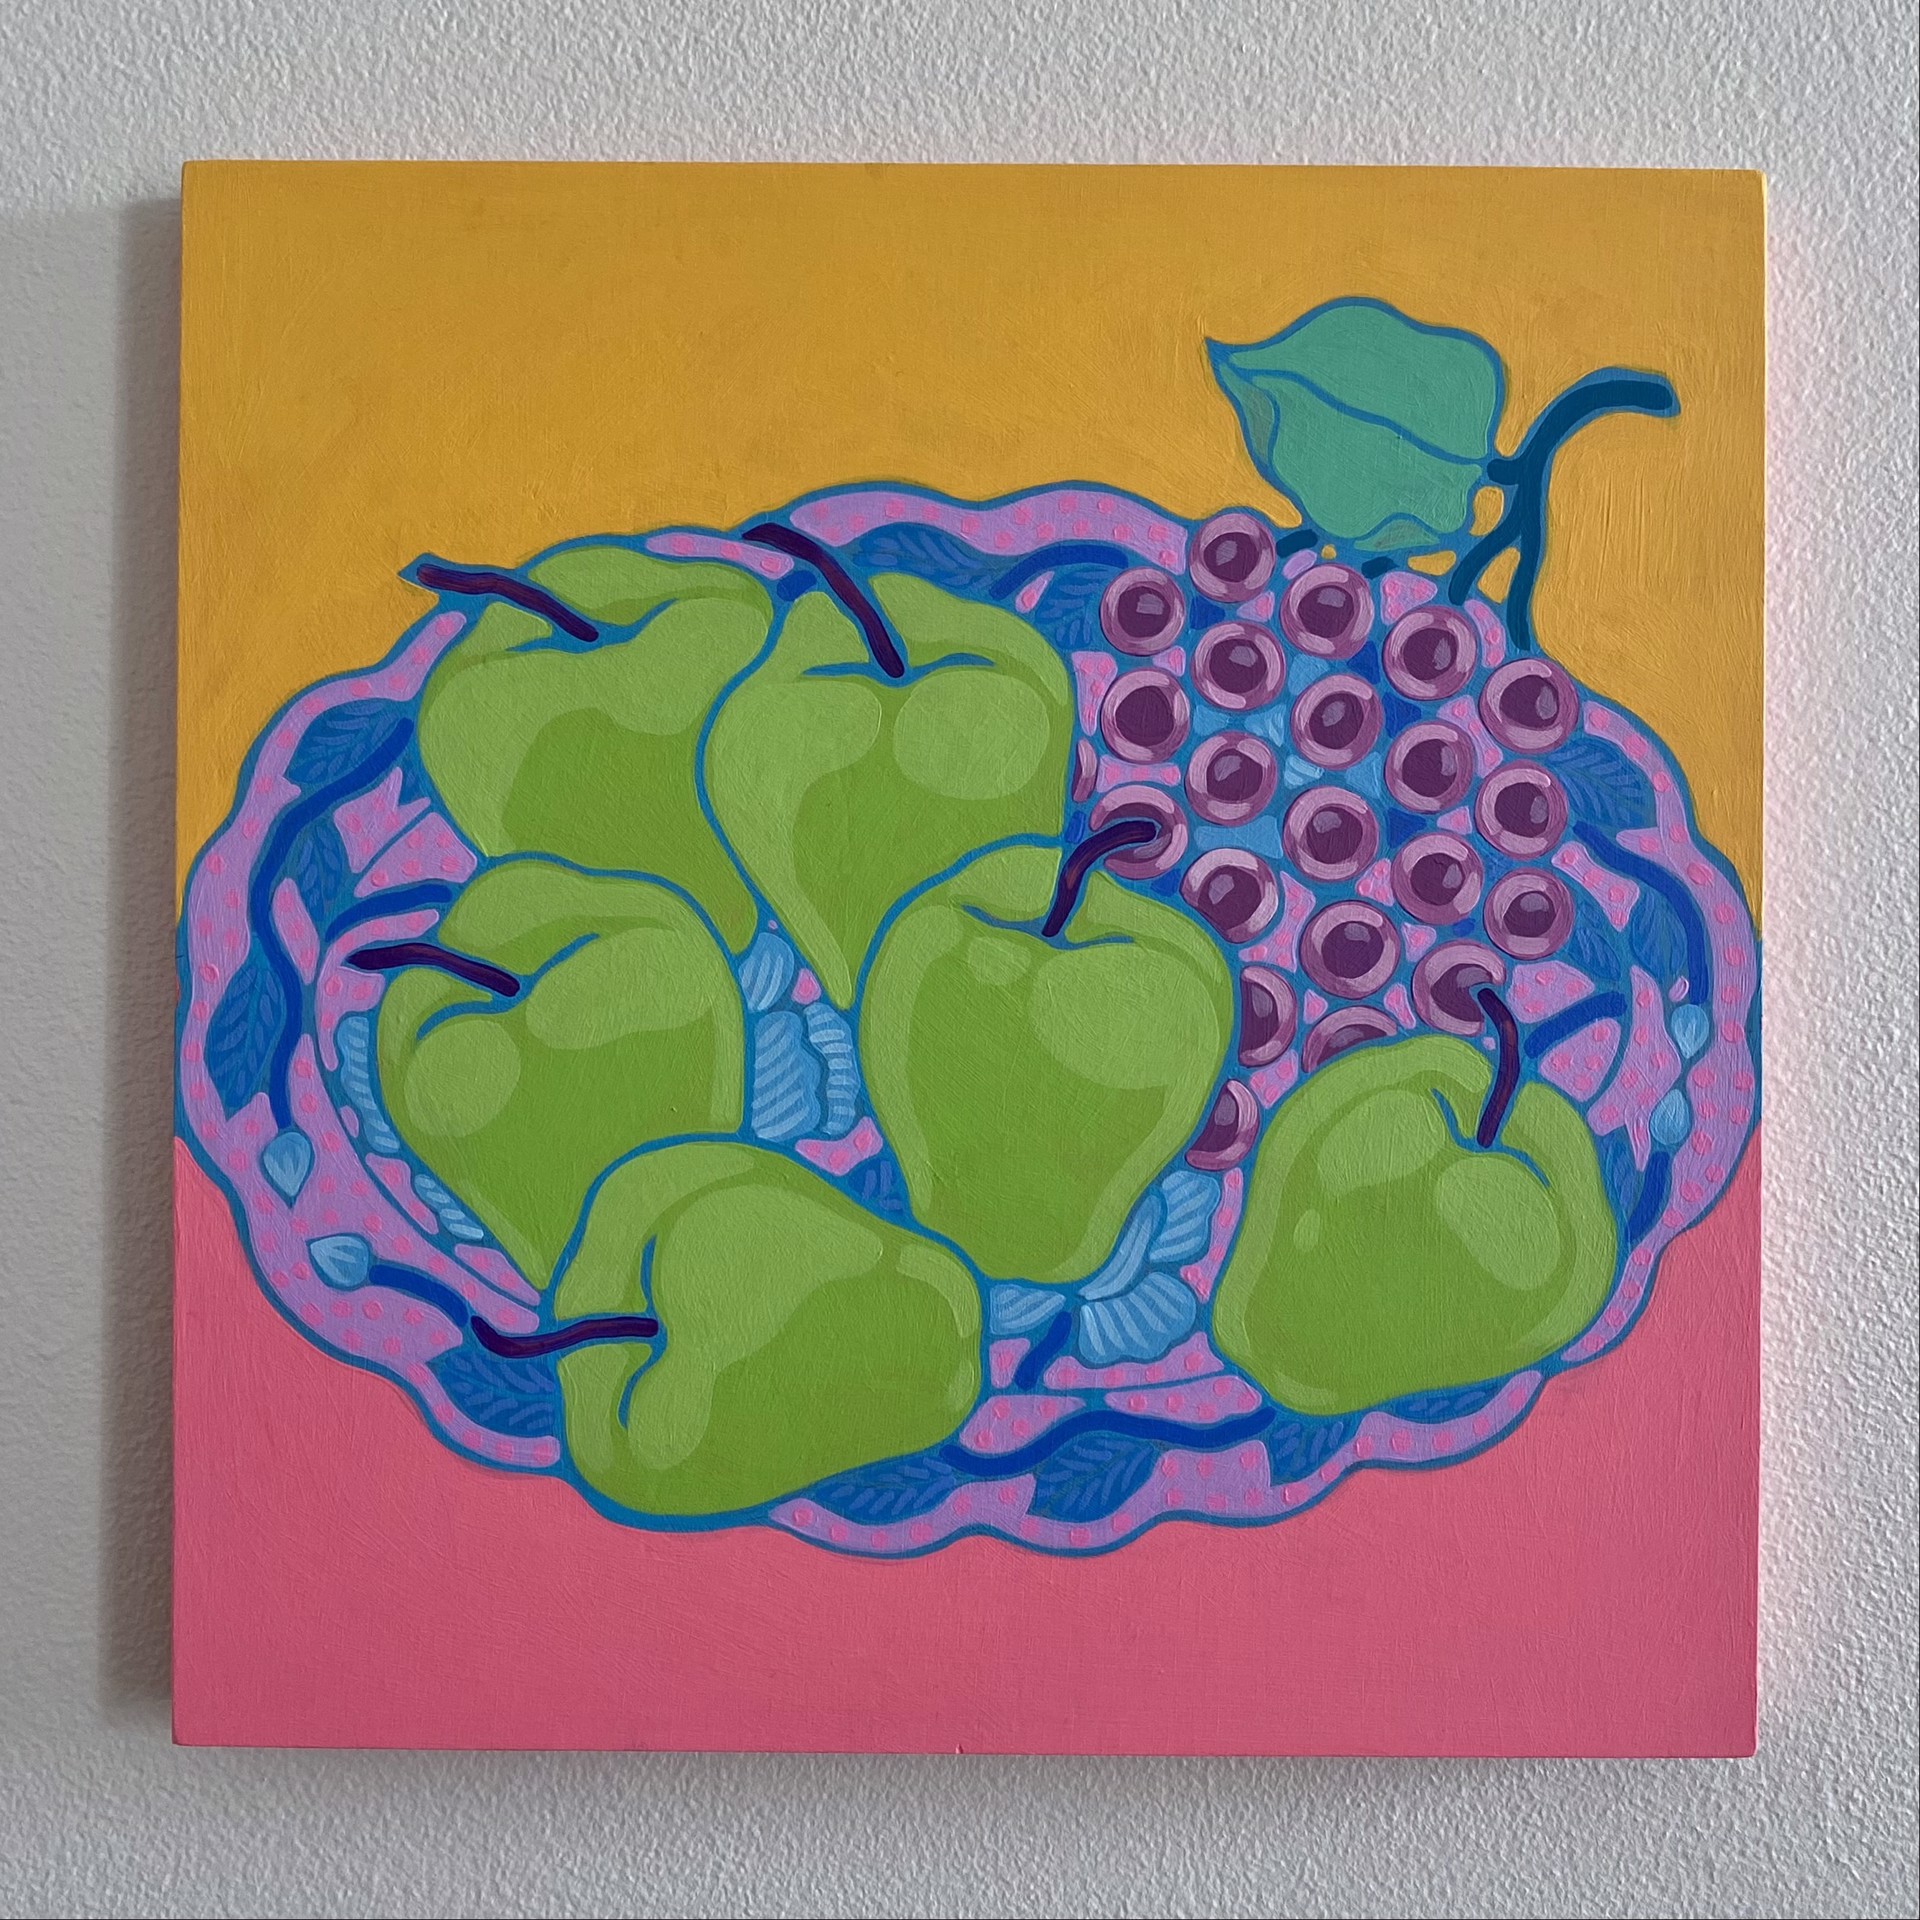 Grapes and Apples on Purple Plate by Sarah Ingraham